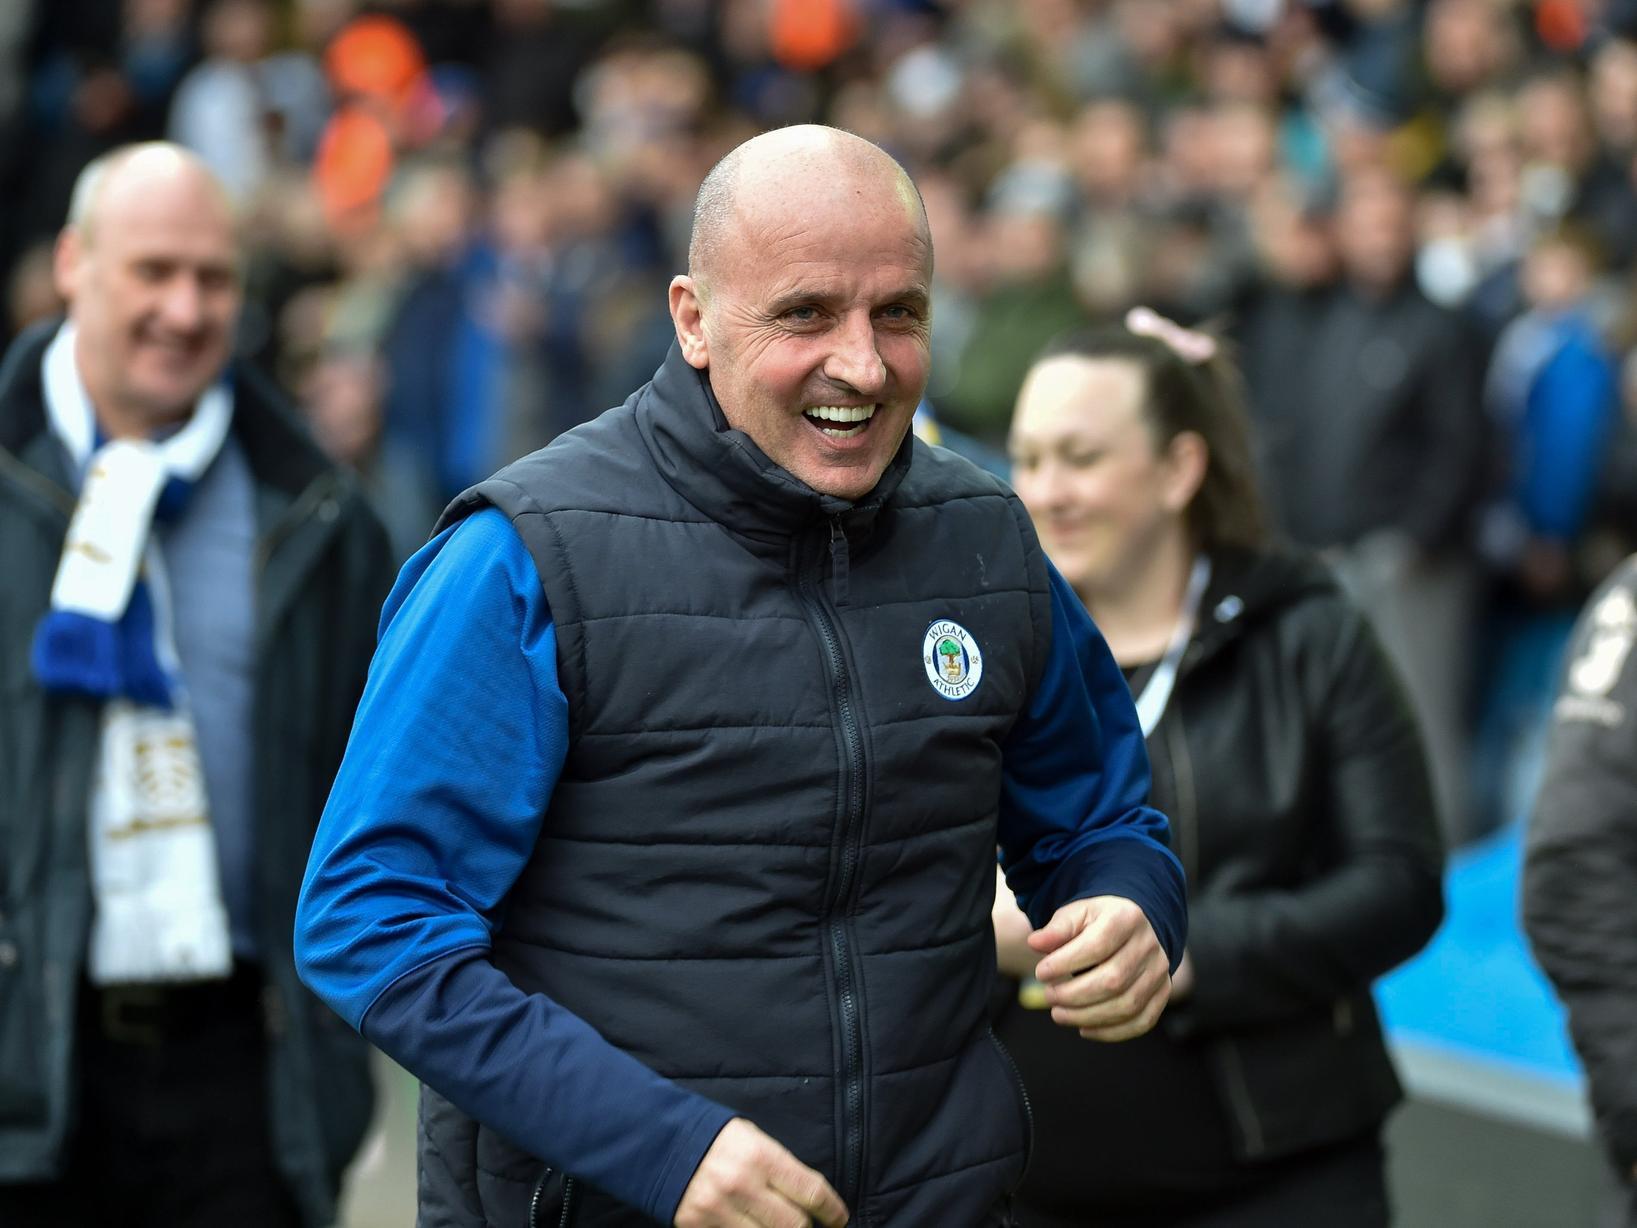 The Wigan Athletic manager showed his class after he masterminded a shock win at Elland Road by hailing Leeds fans as strong supporters and hopes they get the success they deserve this season.